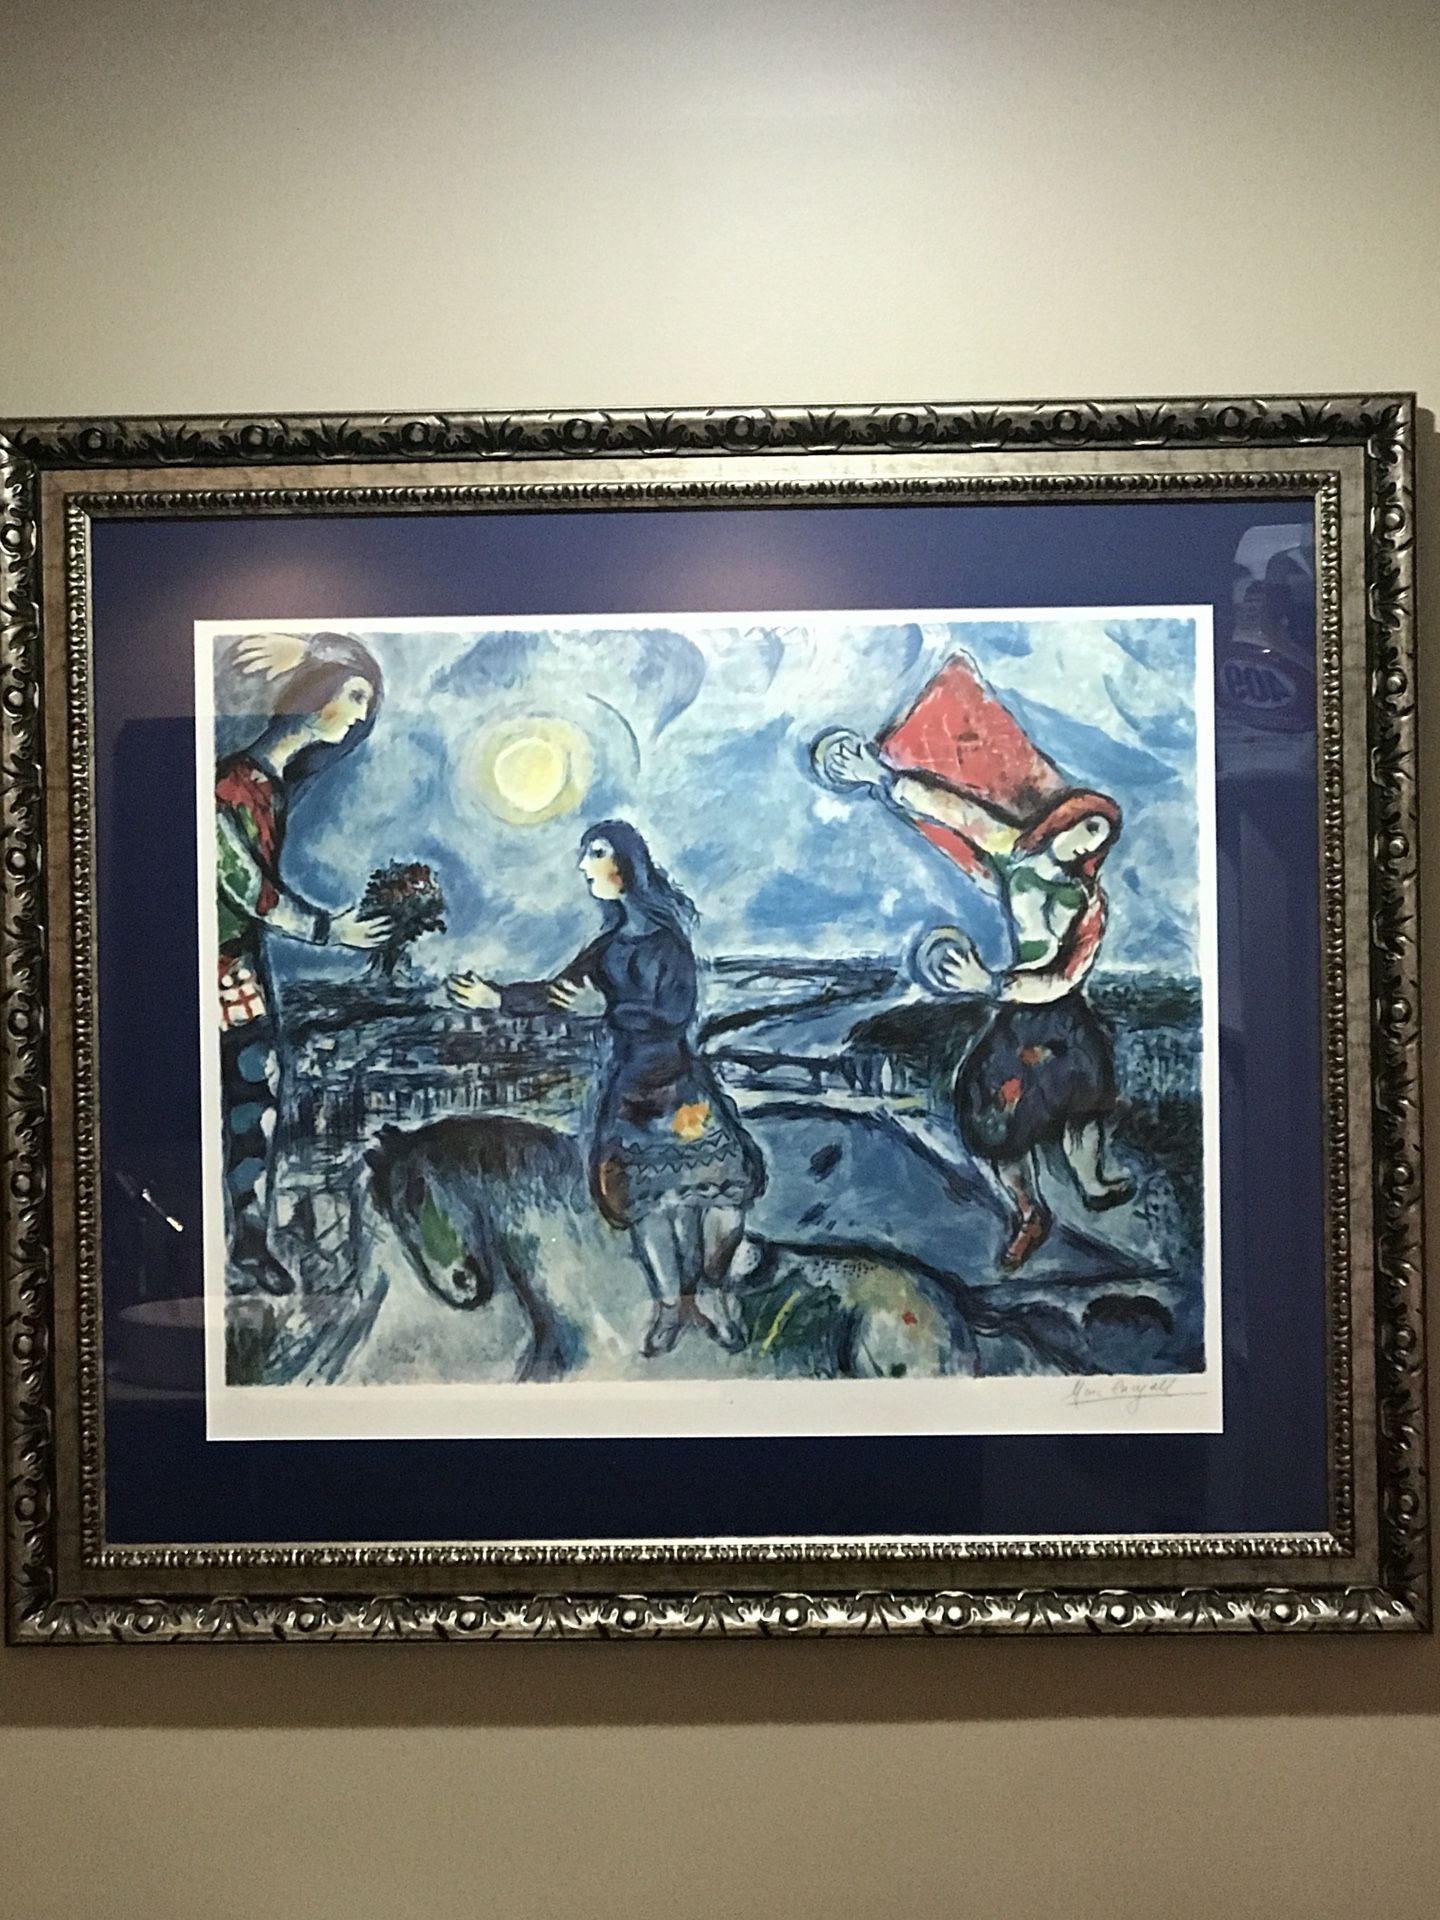 Beautifully framed Marc Chagall print - perfect condition.